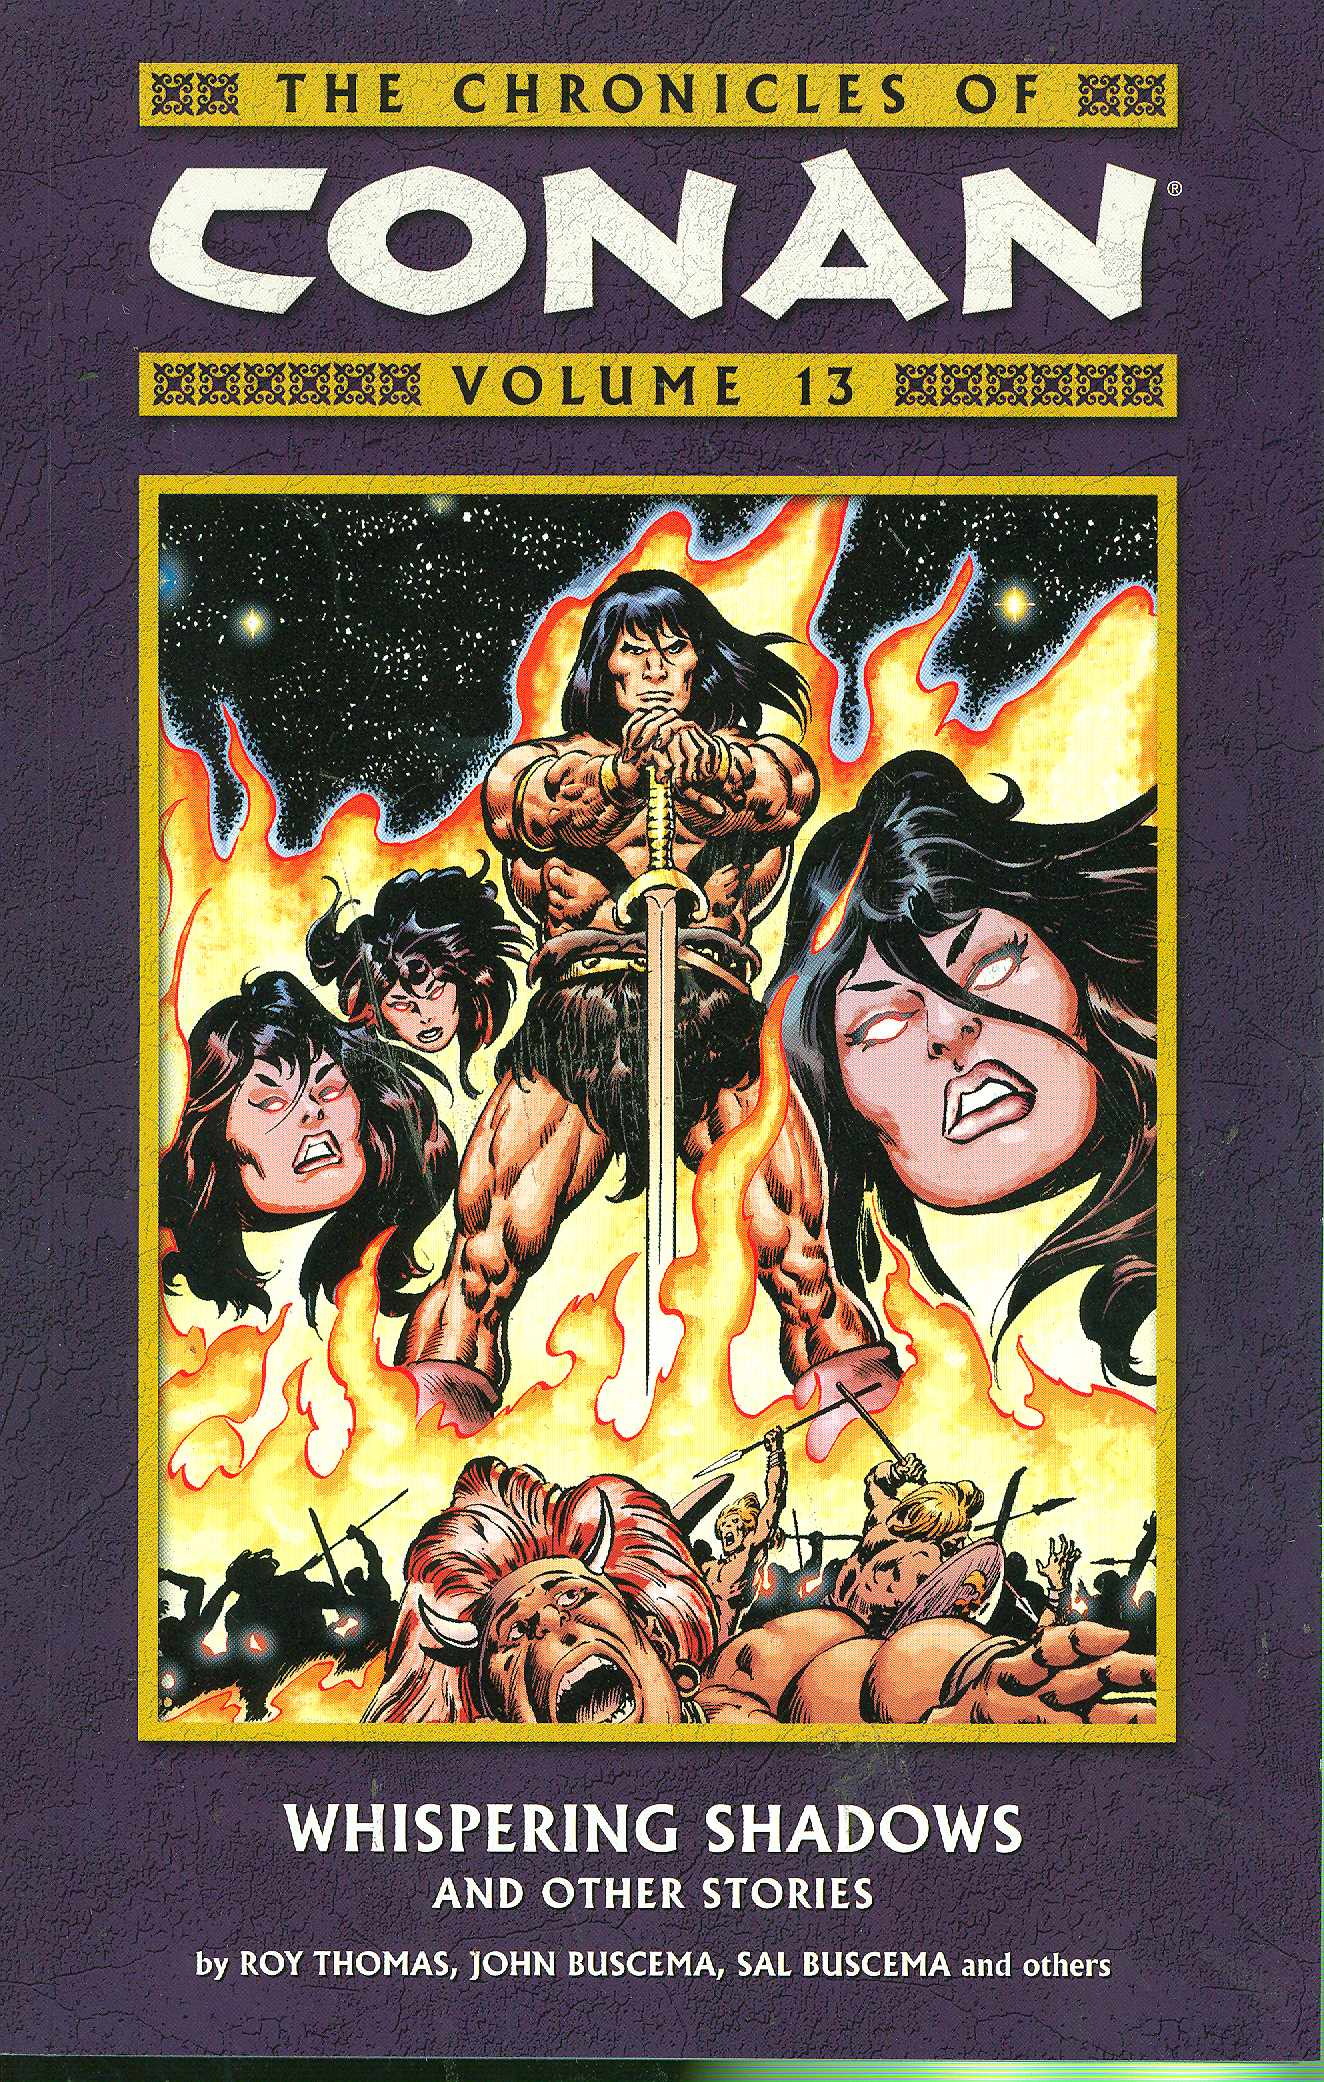 Chronicles of Conan, vol. 2, Rogues in the House (Dark Horse 2003) PB, J113